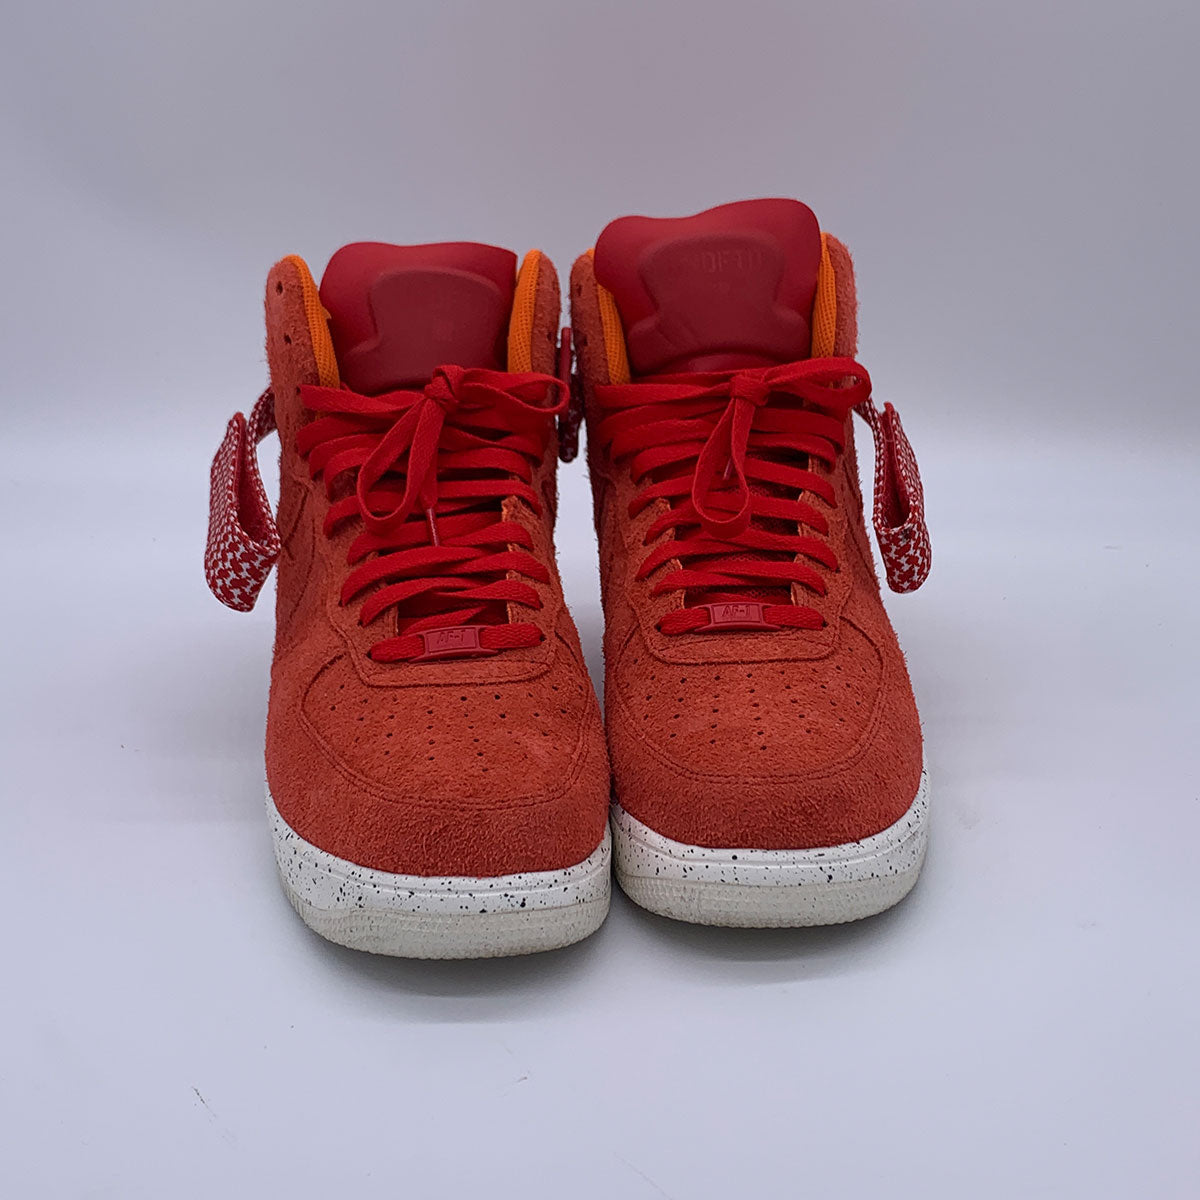 Nike Lunar Force 1 Hi UNFTD SP Undefeated University Red (Pre-Owned)